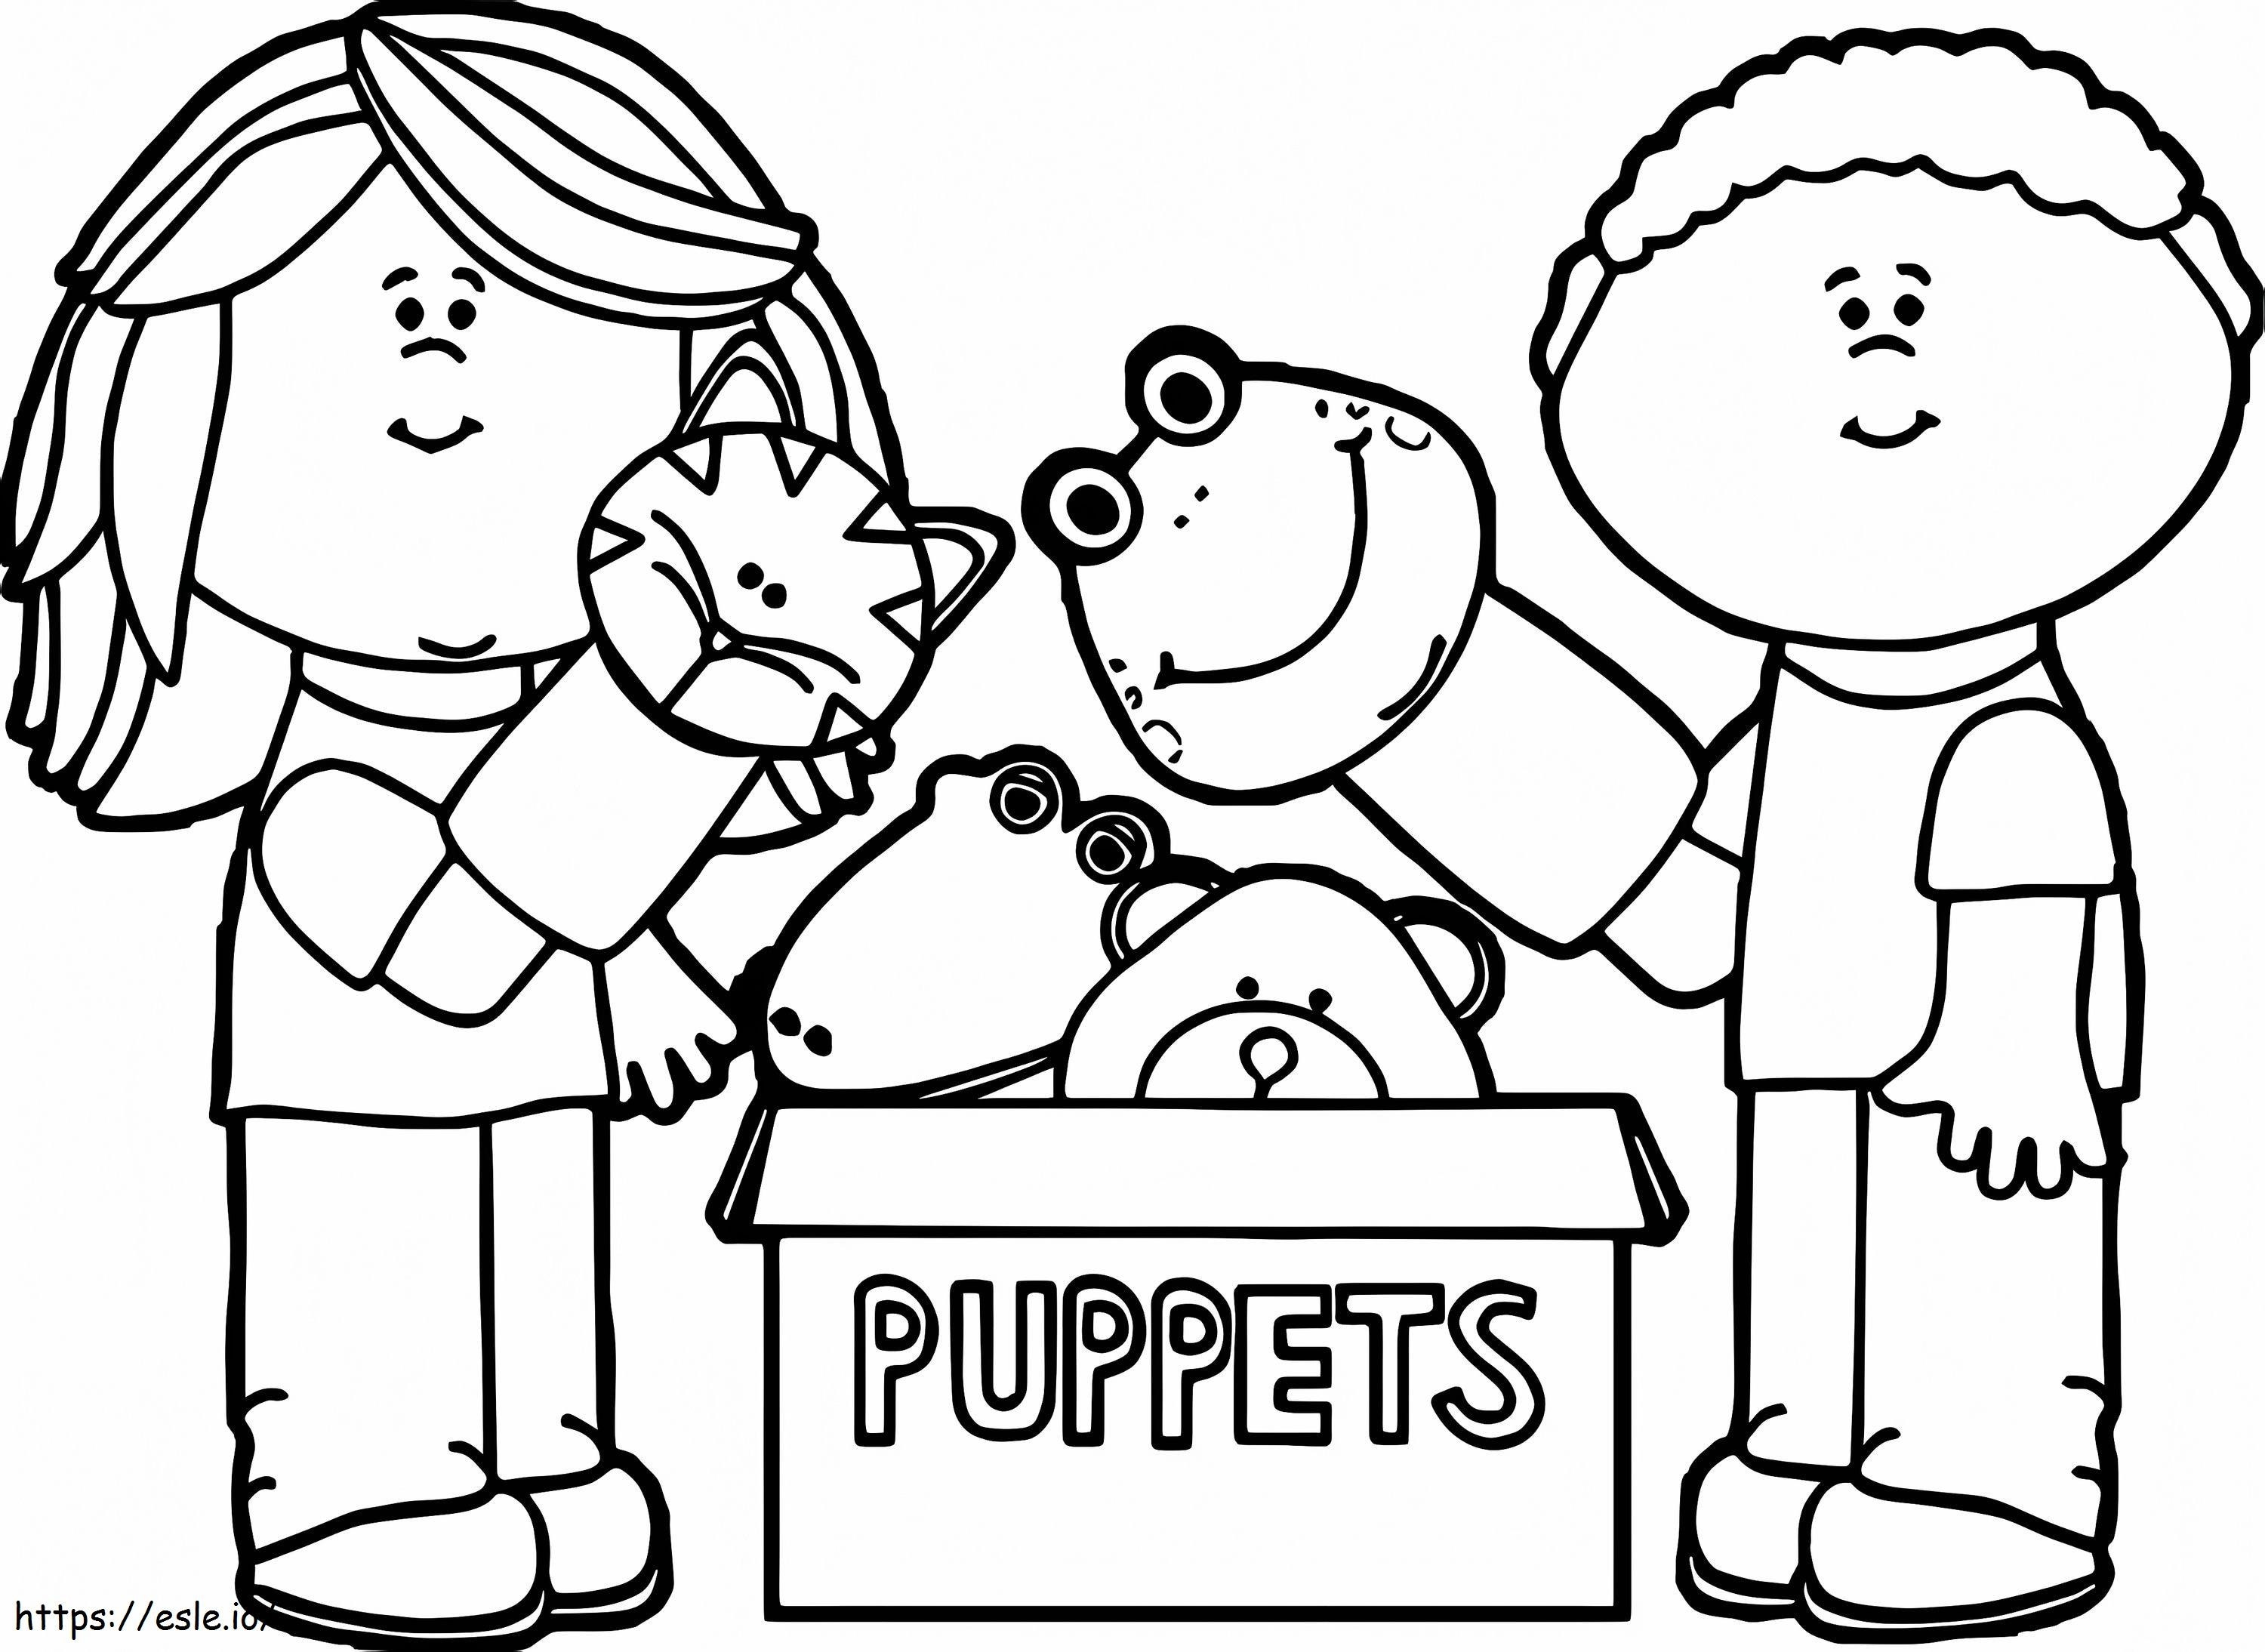 Box Of Puppets coloring page